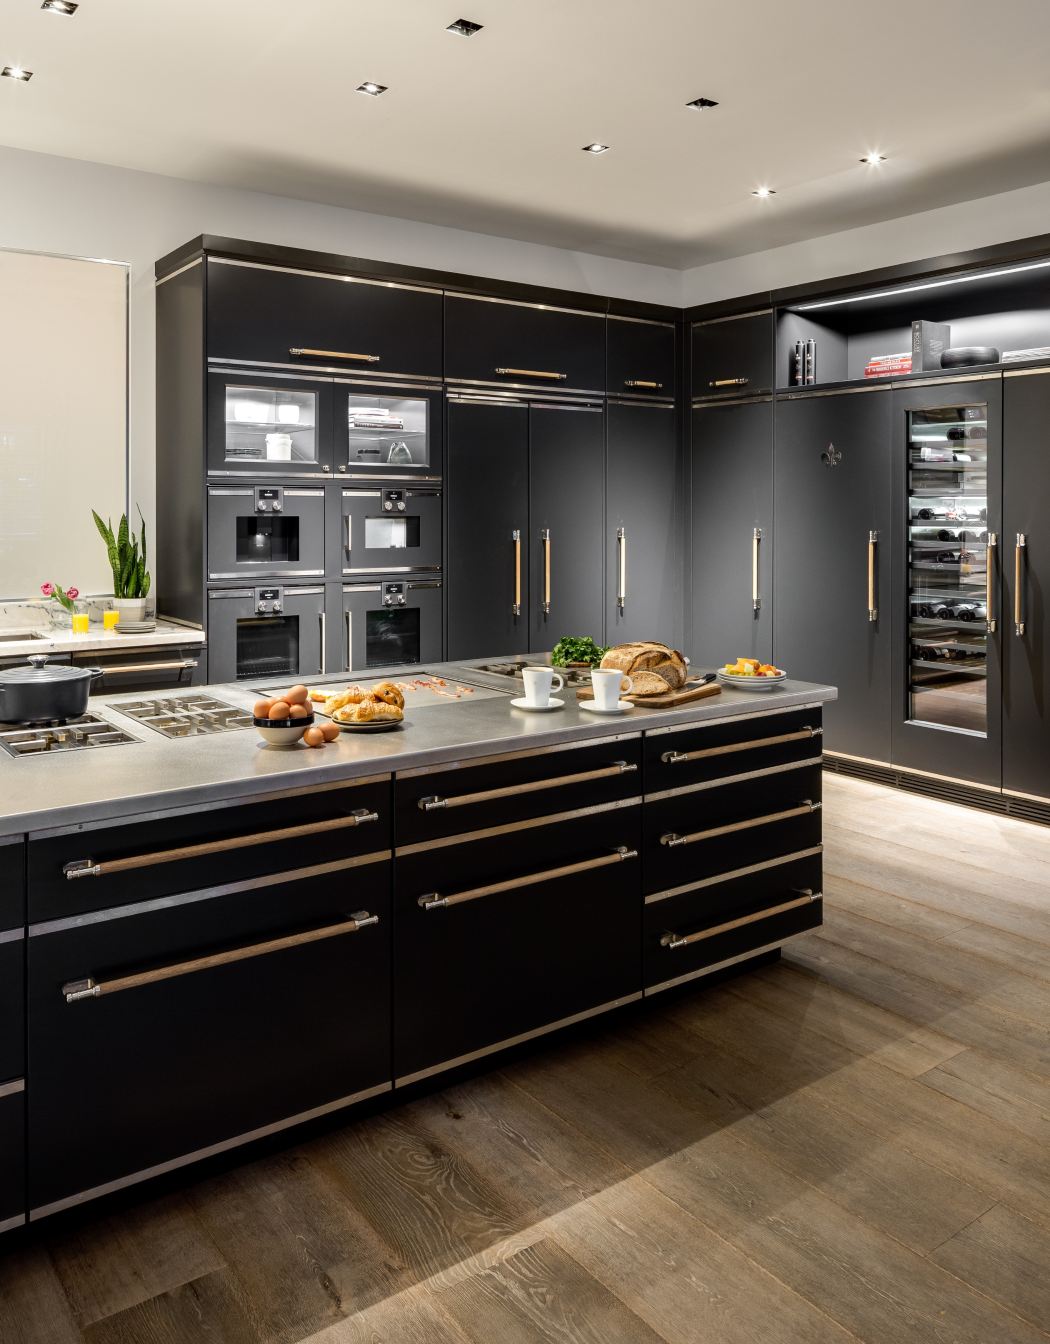 Black kitchen cupboards with wall mounted French ovens with black kitchen cabinets below kitchen countertops with inbuilt stove